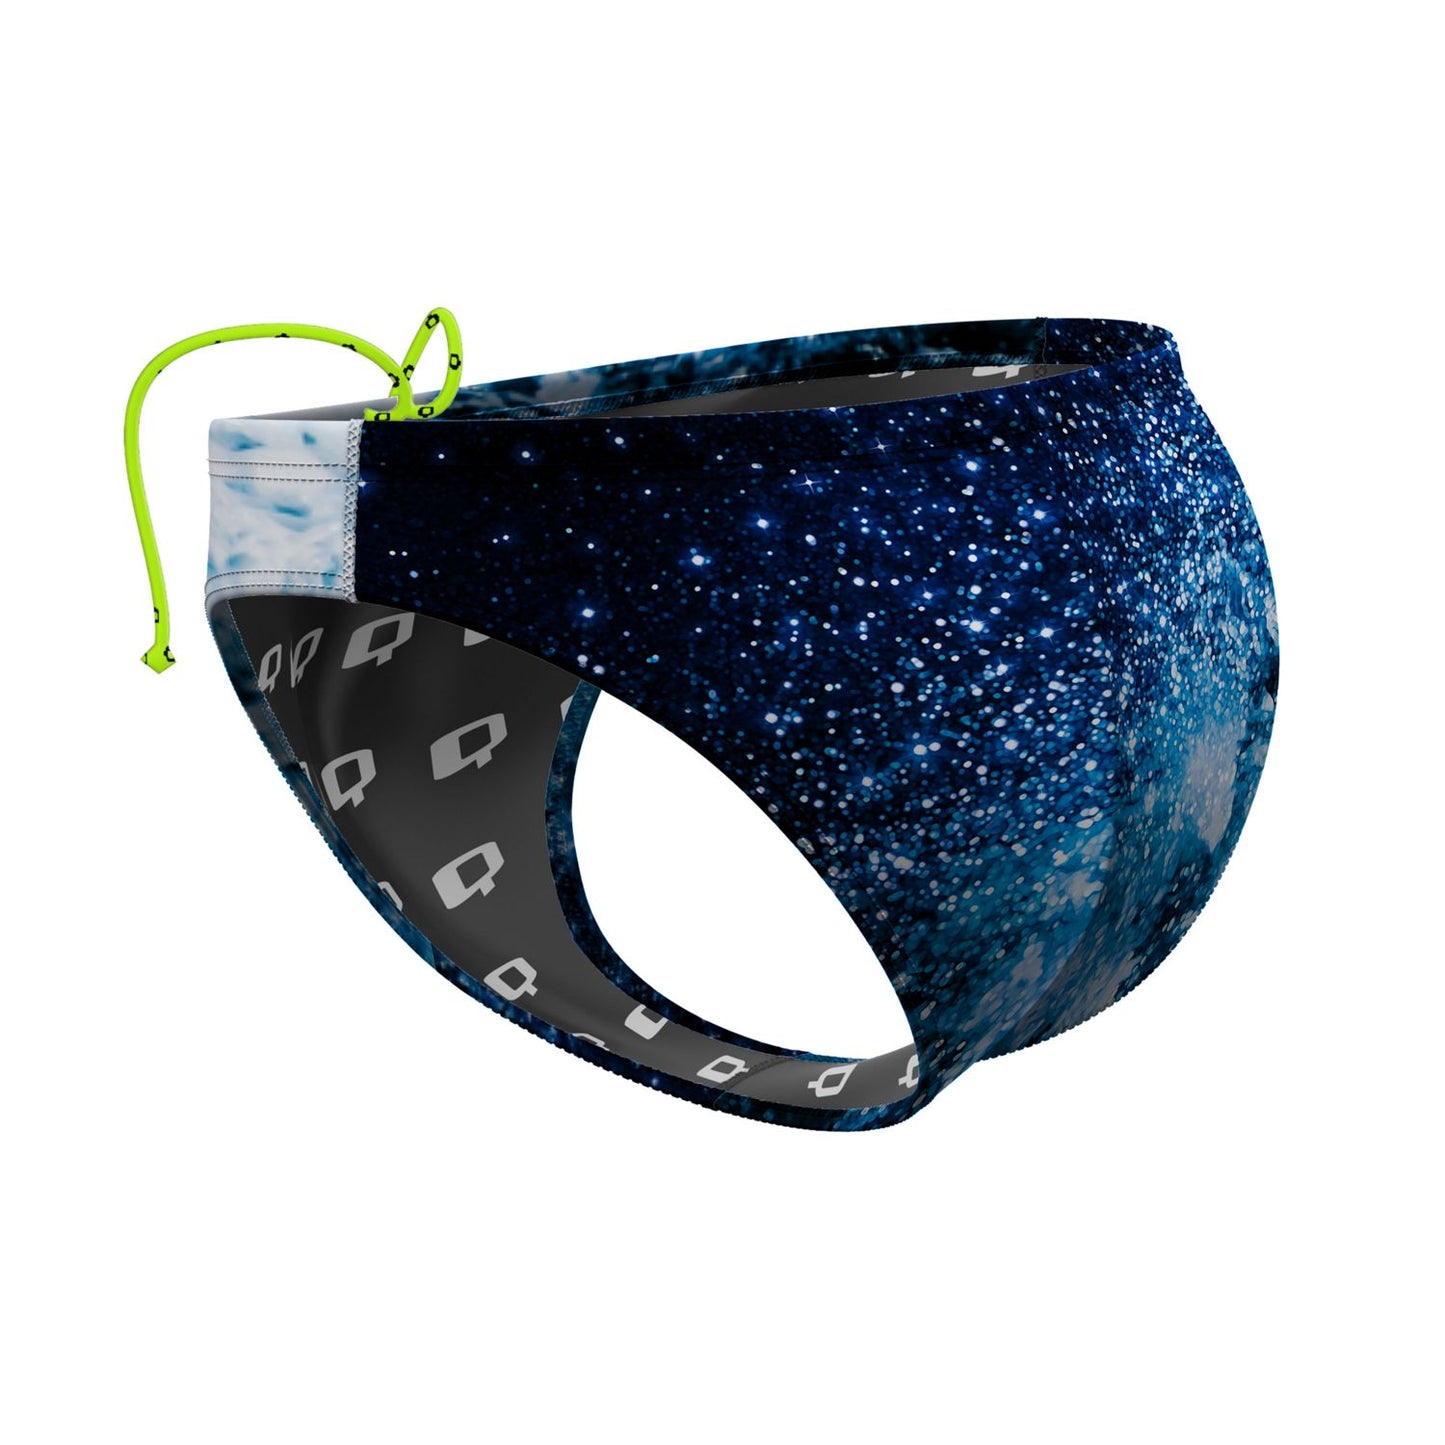 Cosmic Waves Waterpolo Brief